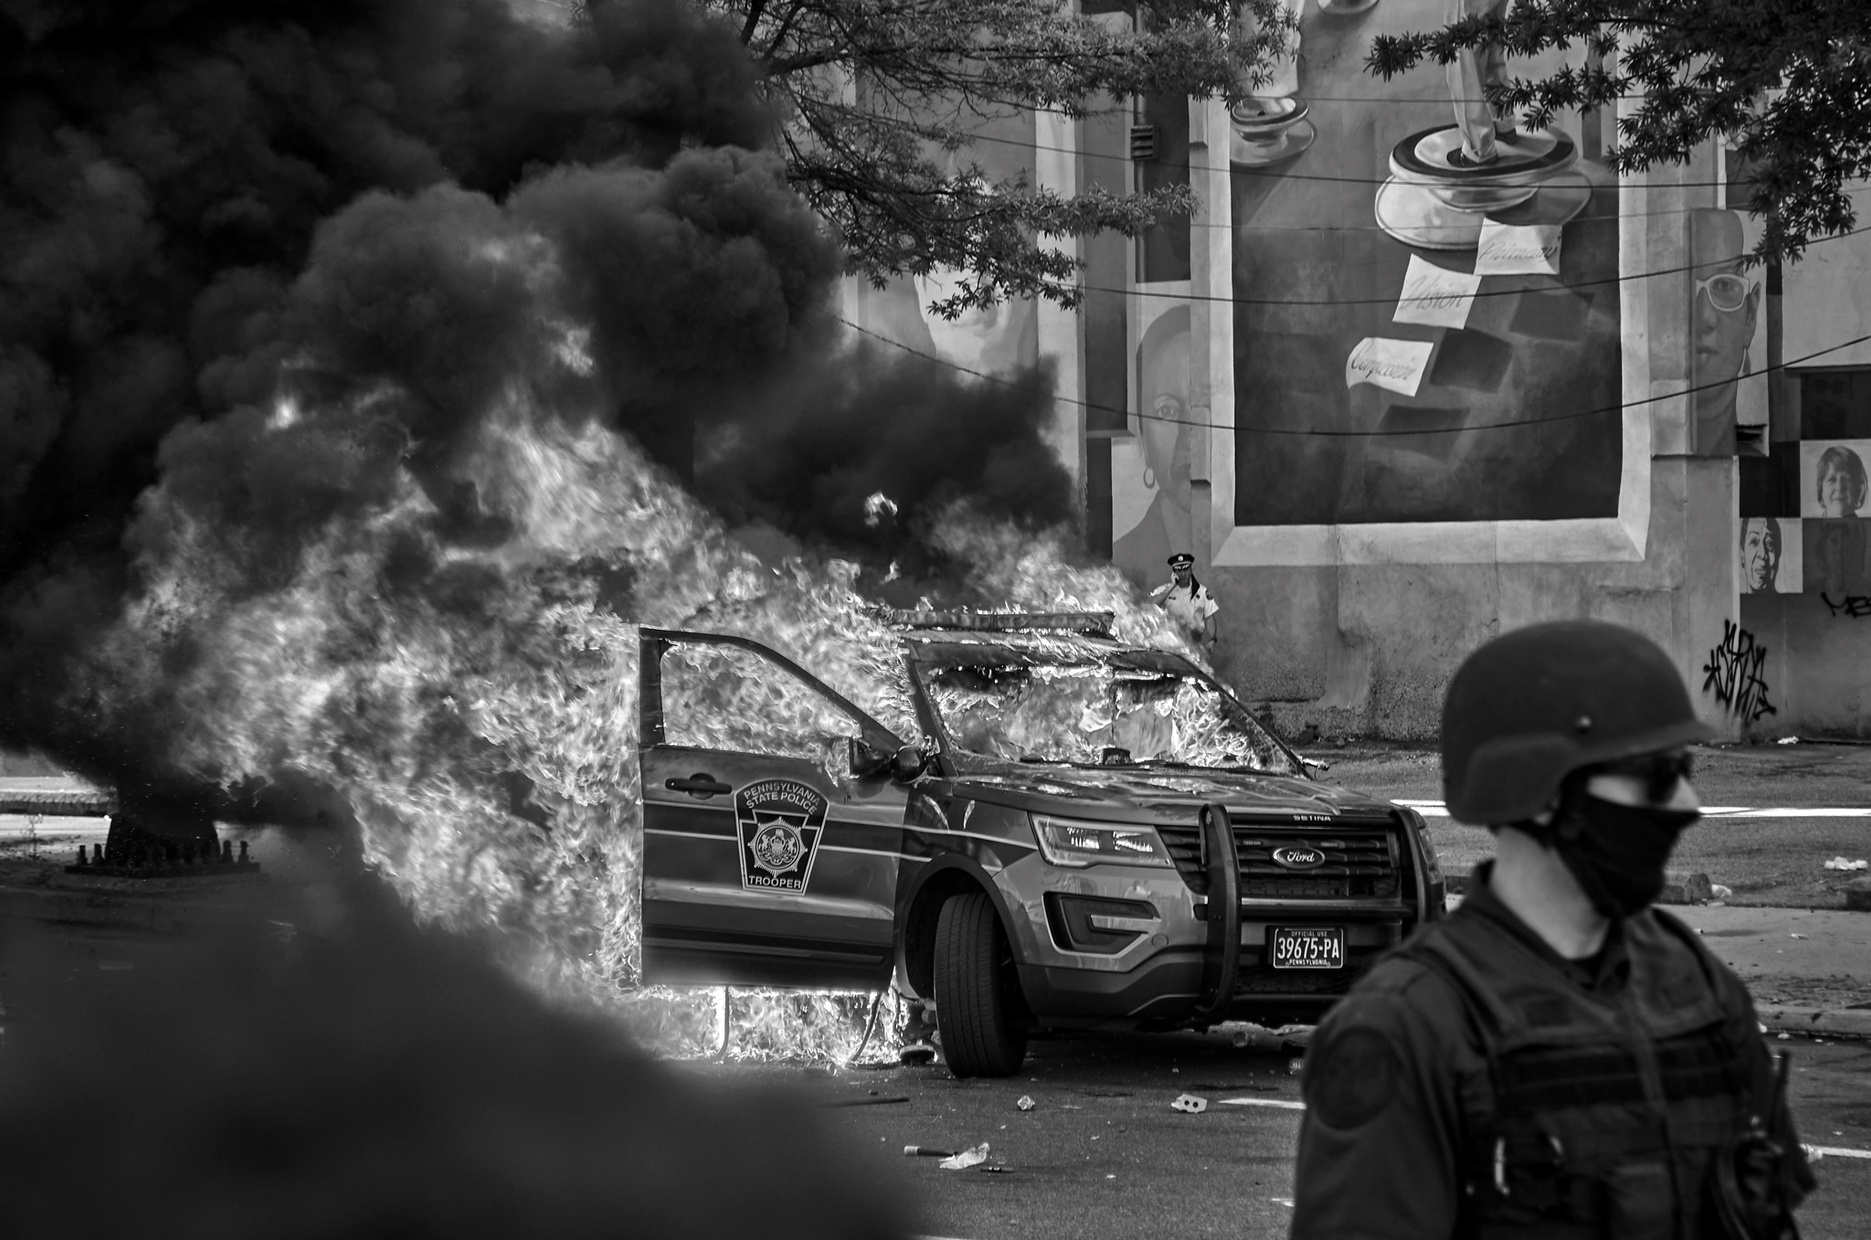 A black and white photograph of a police car on fire in front of a wall with a mural.